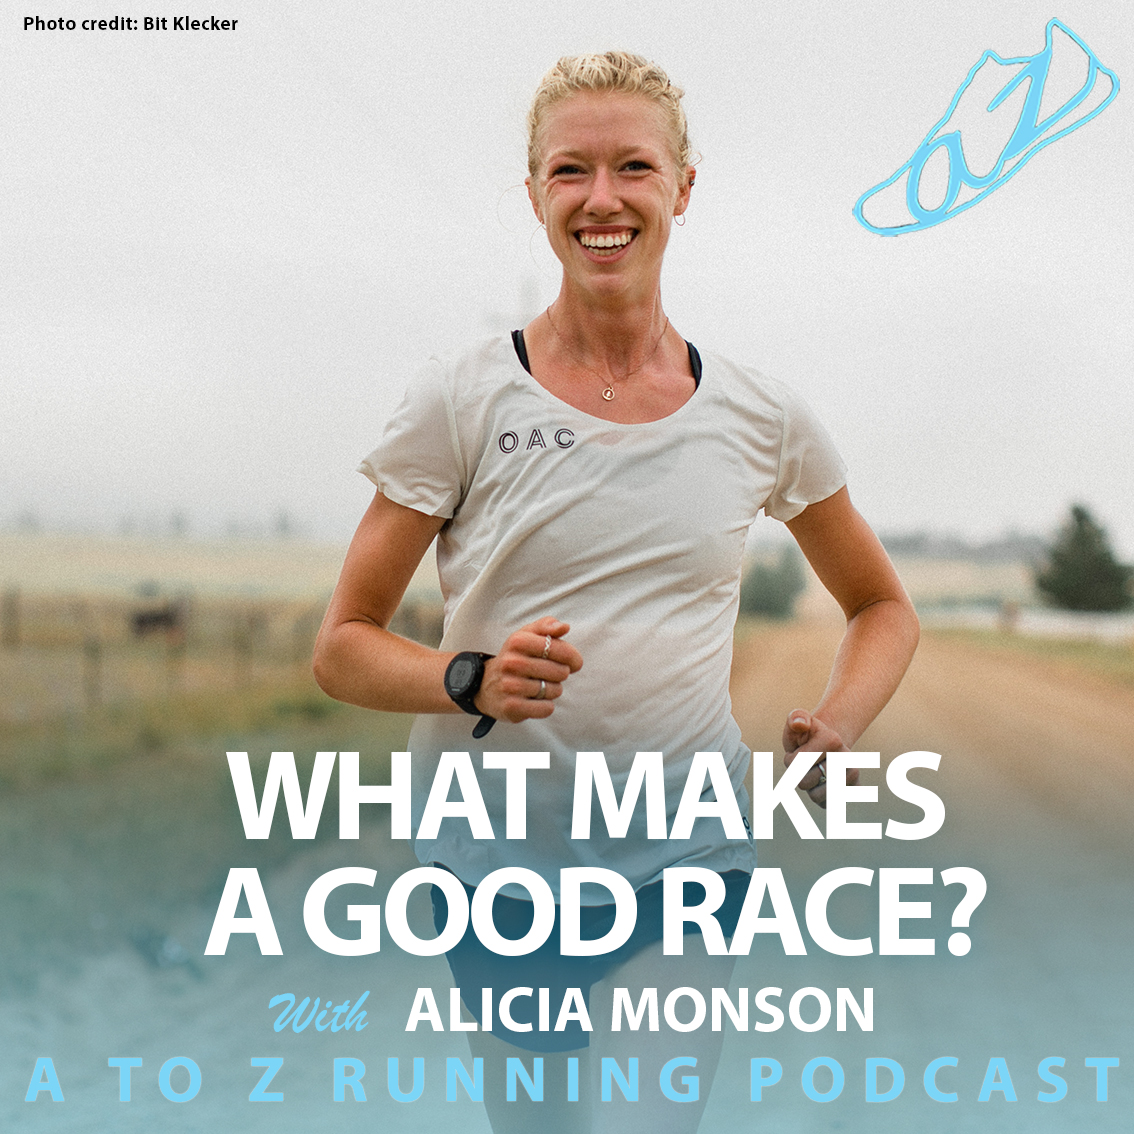 Alicia Monson on the A to Z Running Podcast